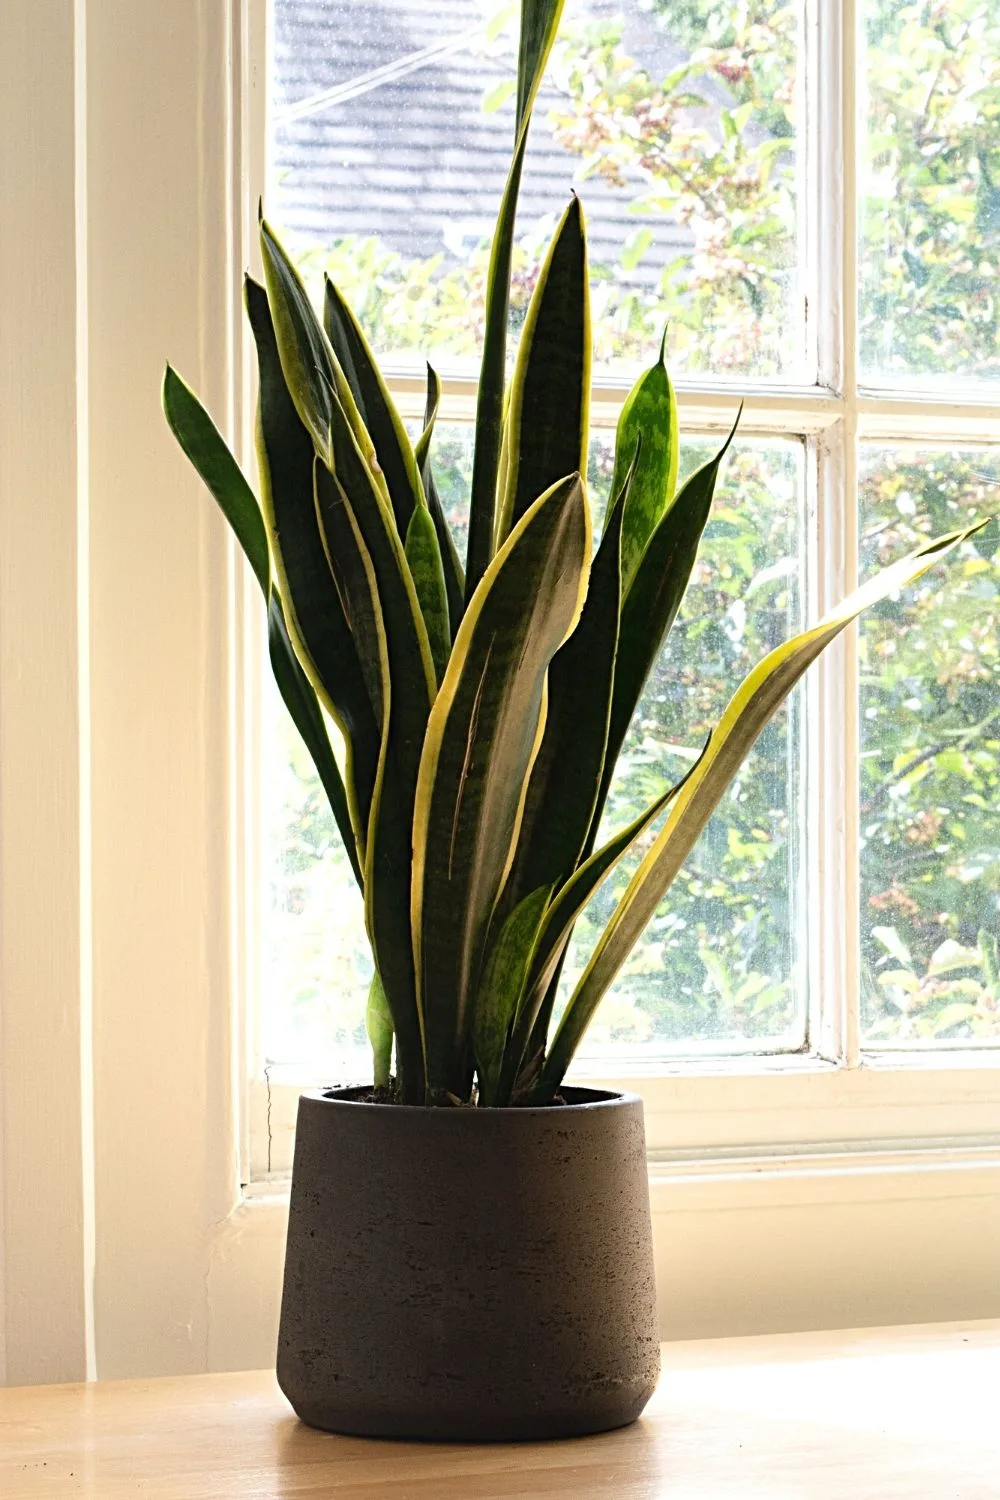 Snake plant, known for its yellow or white pinstripes on dark green foliage, is another great addition to your northeast-facing window collection